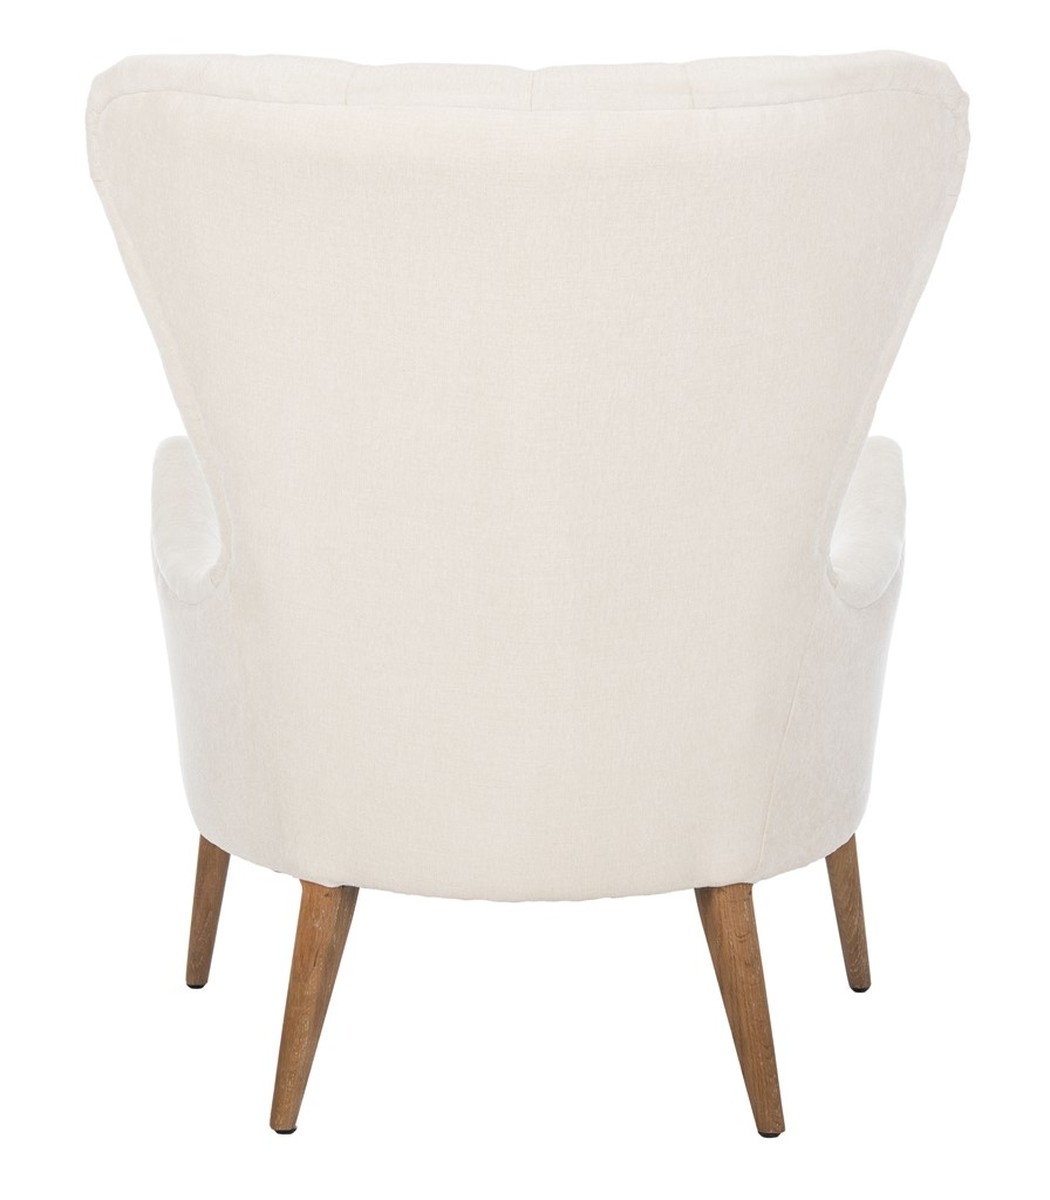 Brayden Contemporary Wingback Chair - Off White - Arlo Home - Image 10